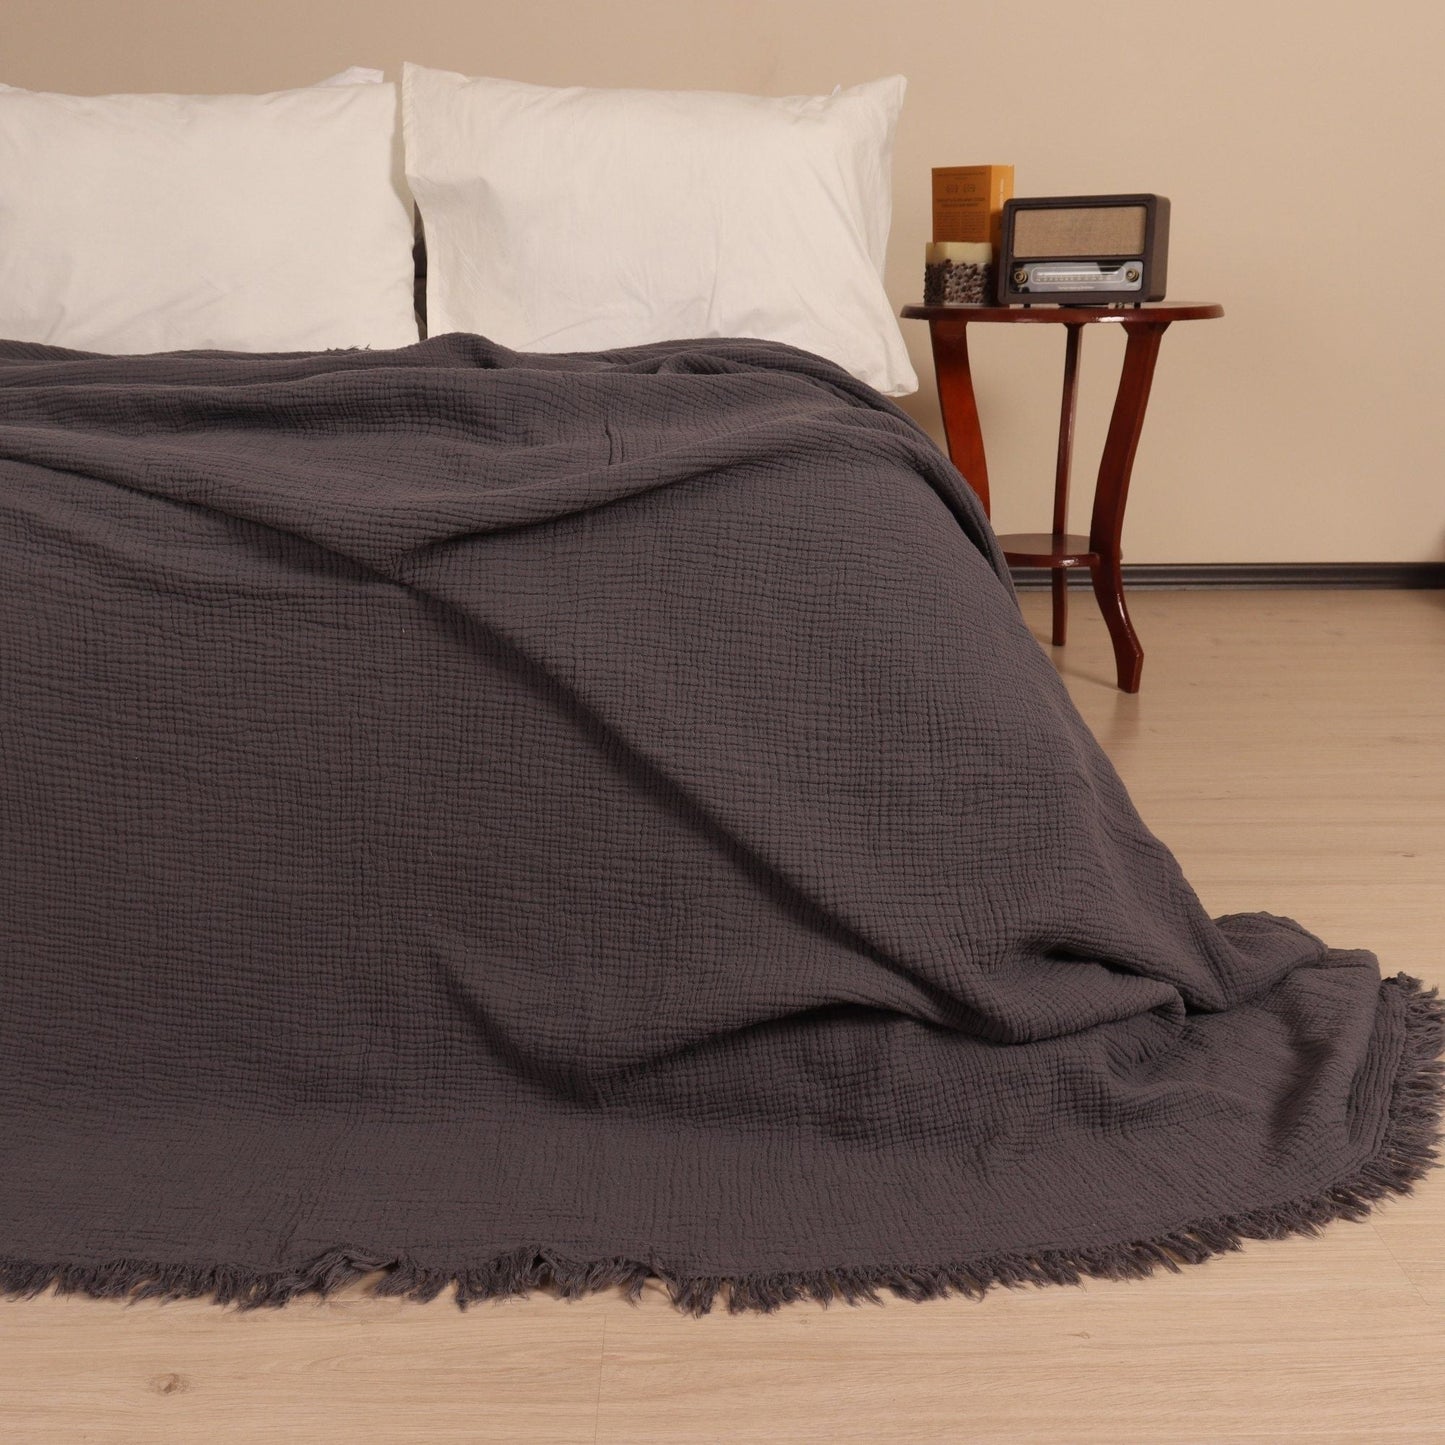 Anthracite Muslin Blankets for Adults 1